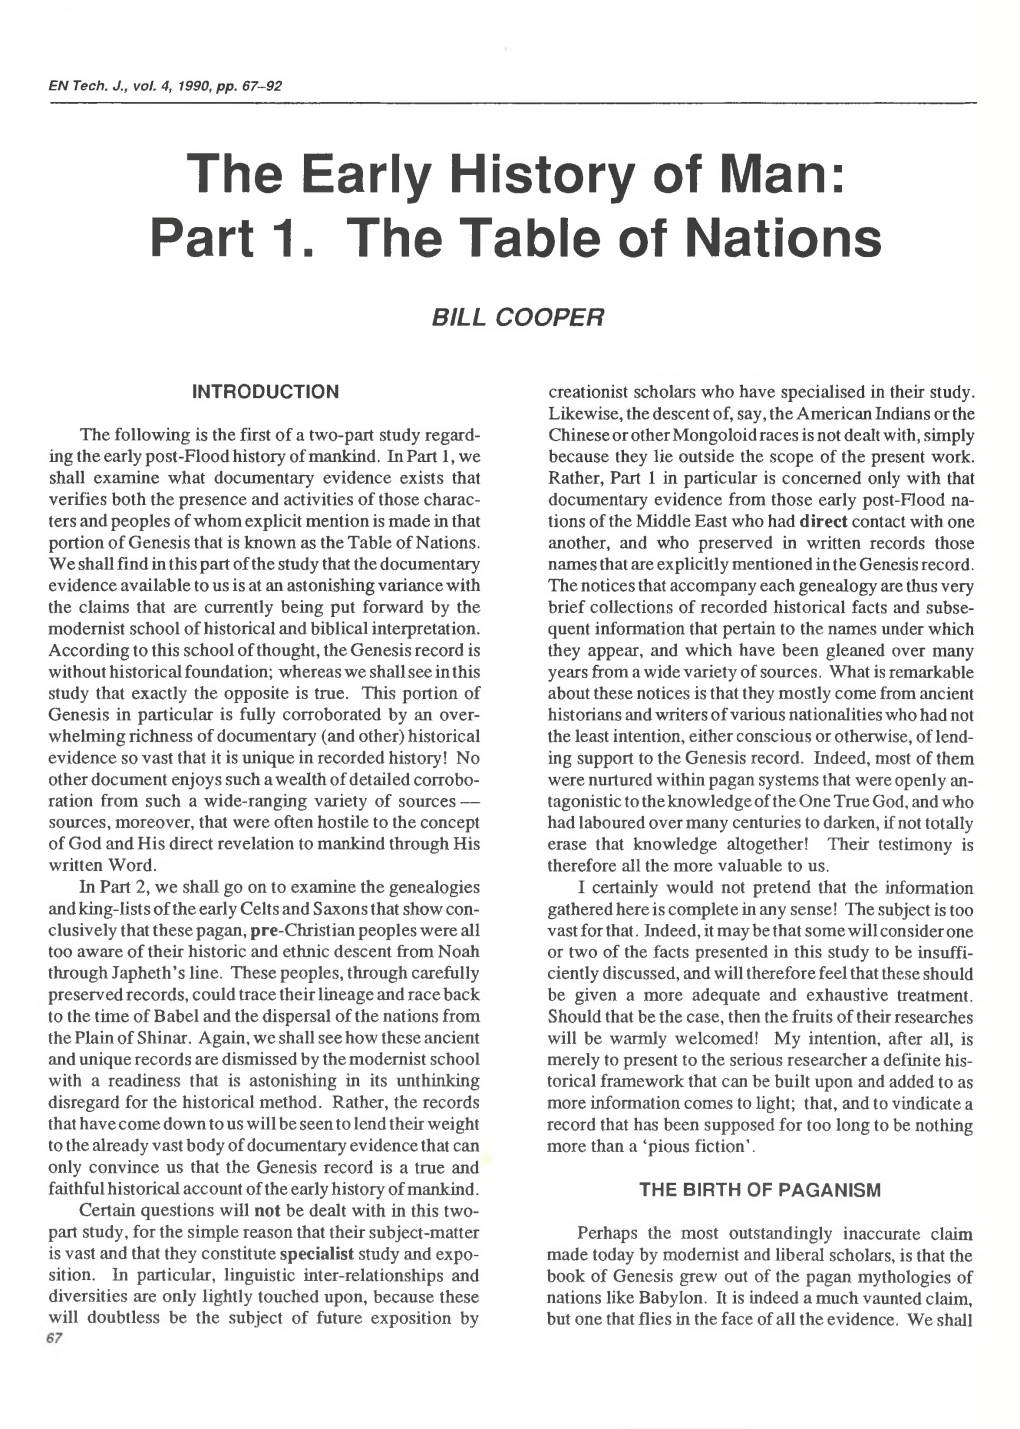 Part 1. the Table of Nations